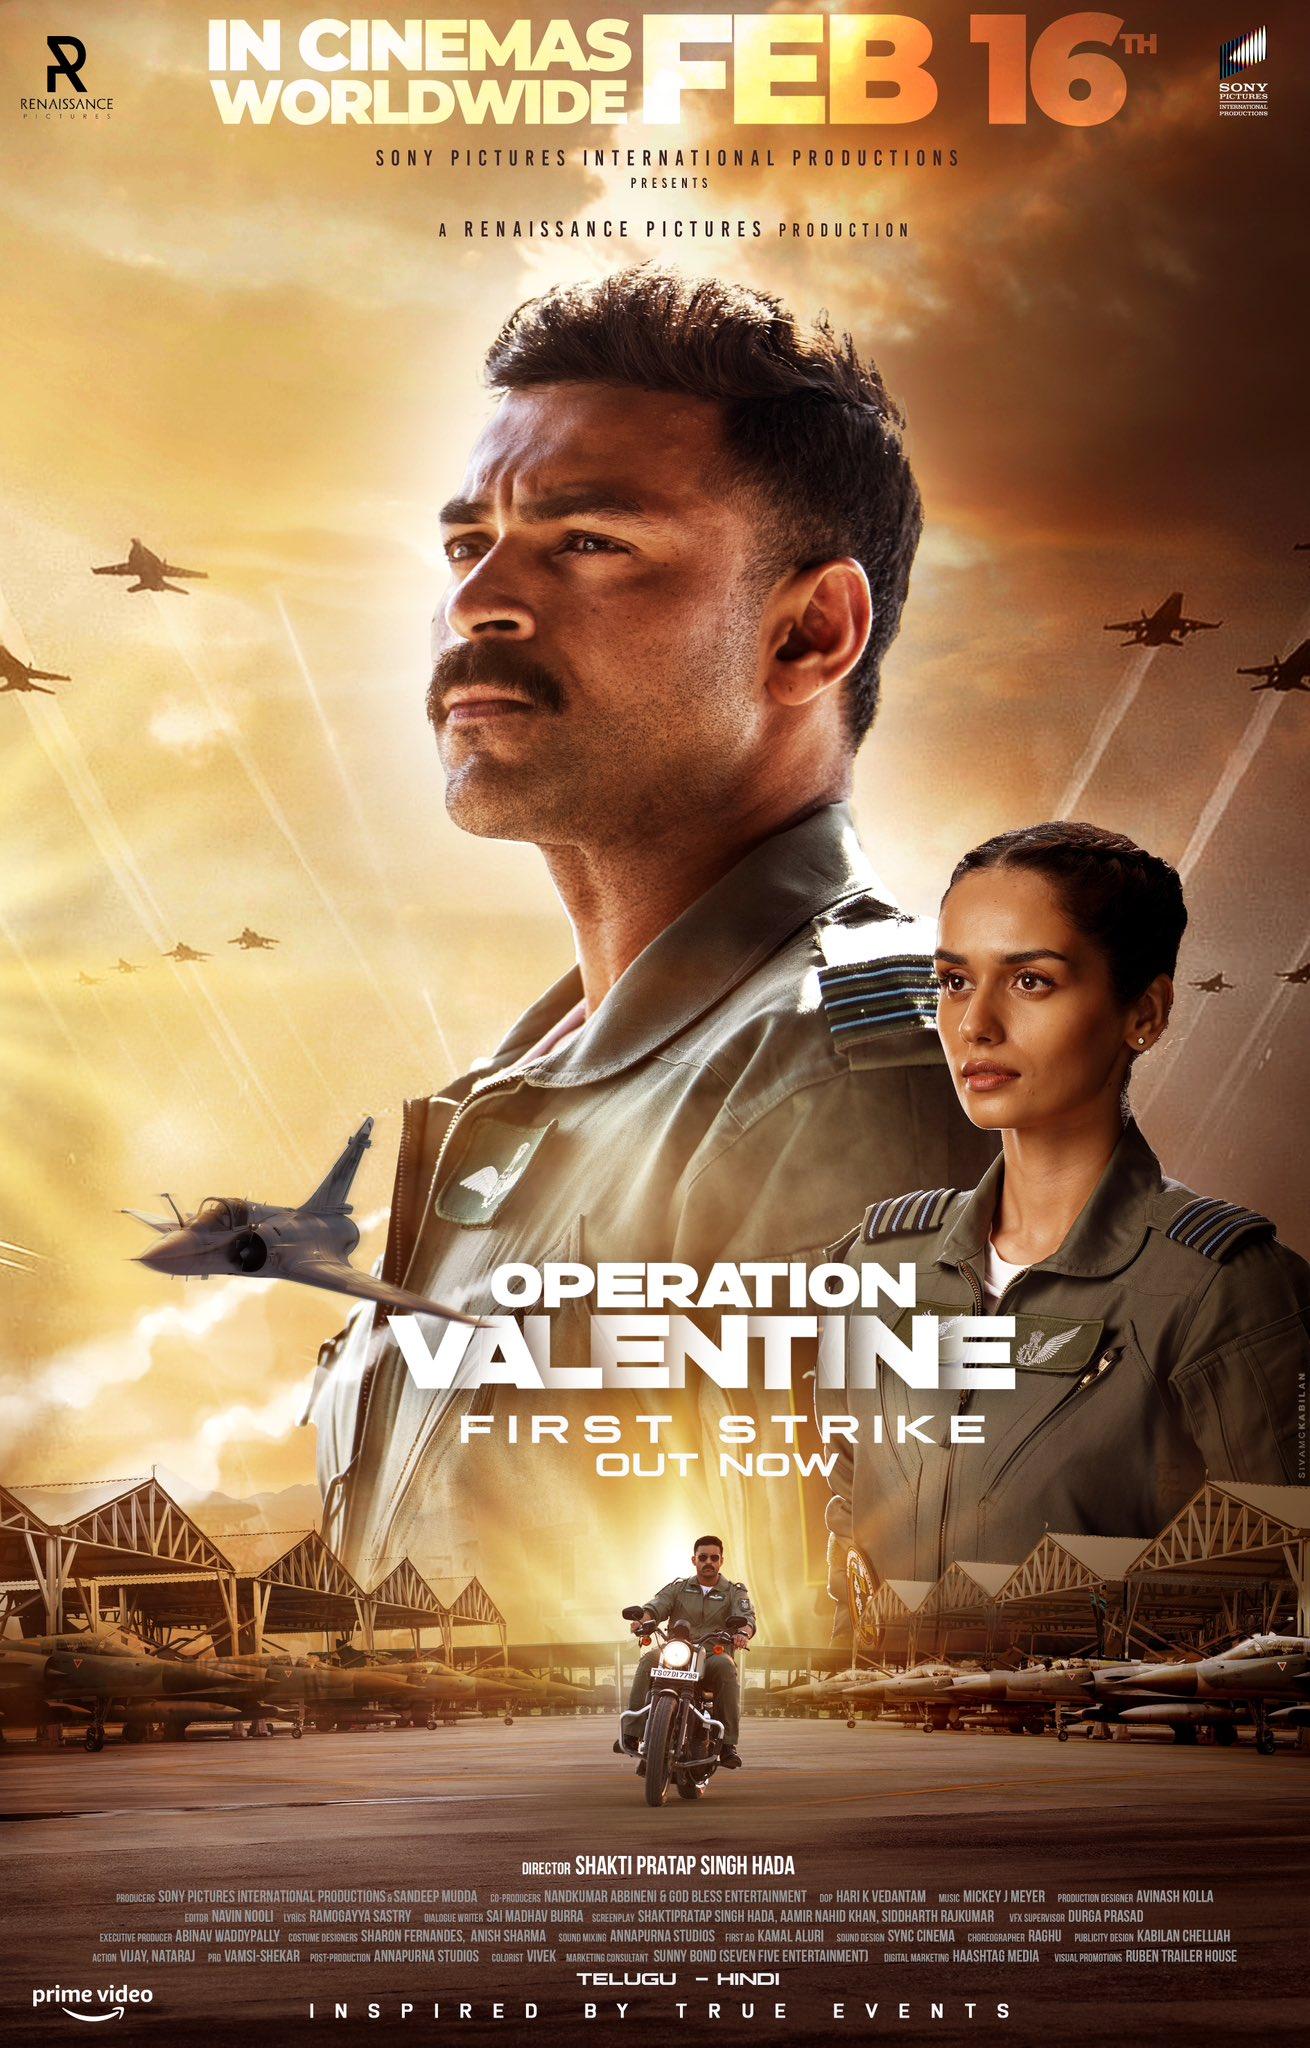 Operation Valentine (March 1) - Theatre Varun Tej takes the lead in this airborne war thriller, 